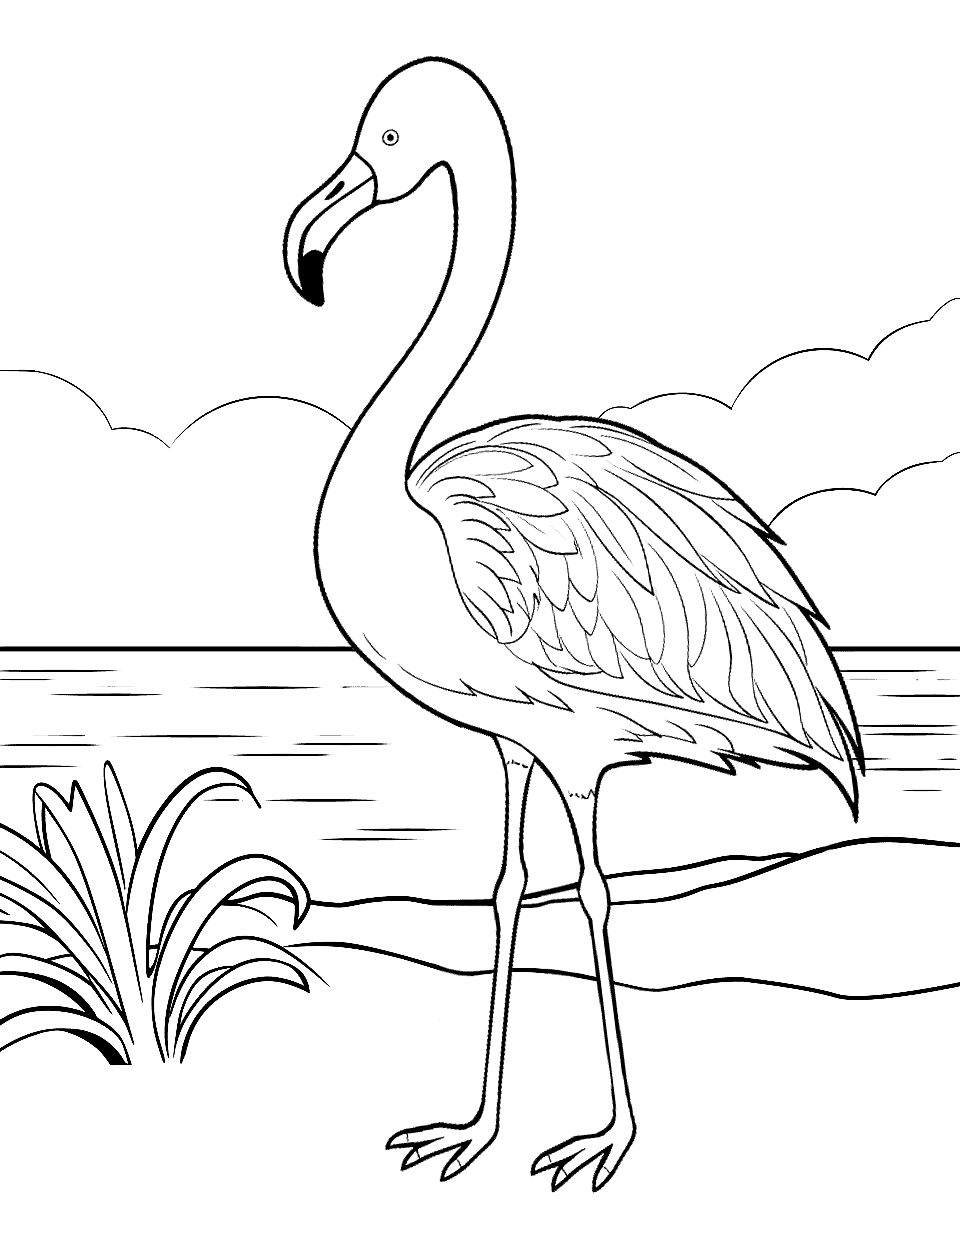 Beachside Flamingo Relaxation Coloring Page - A flamingo chilling by the beach.